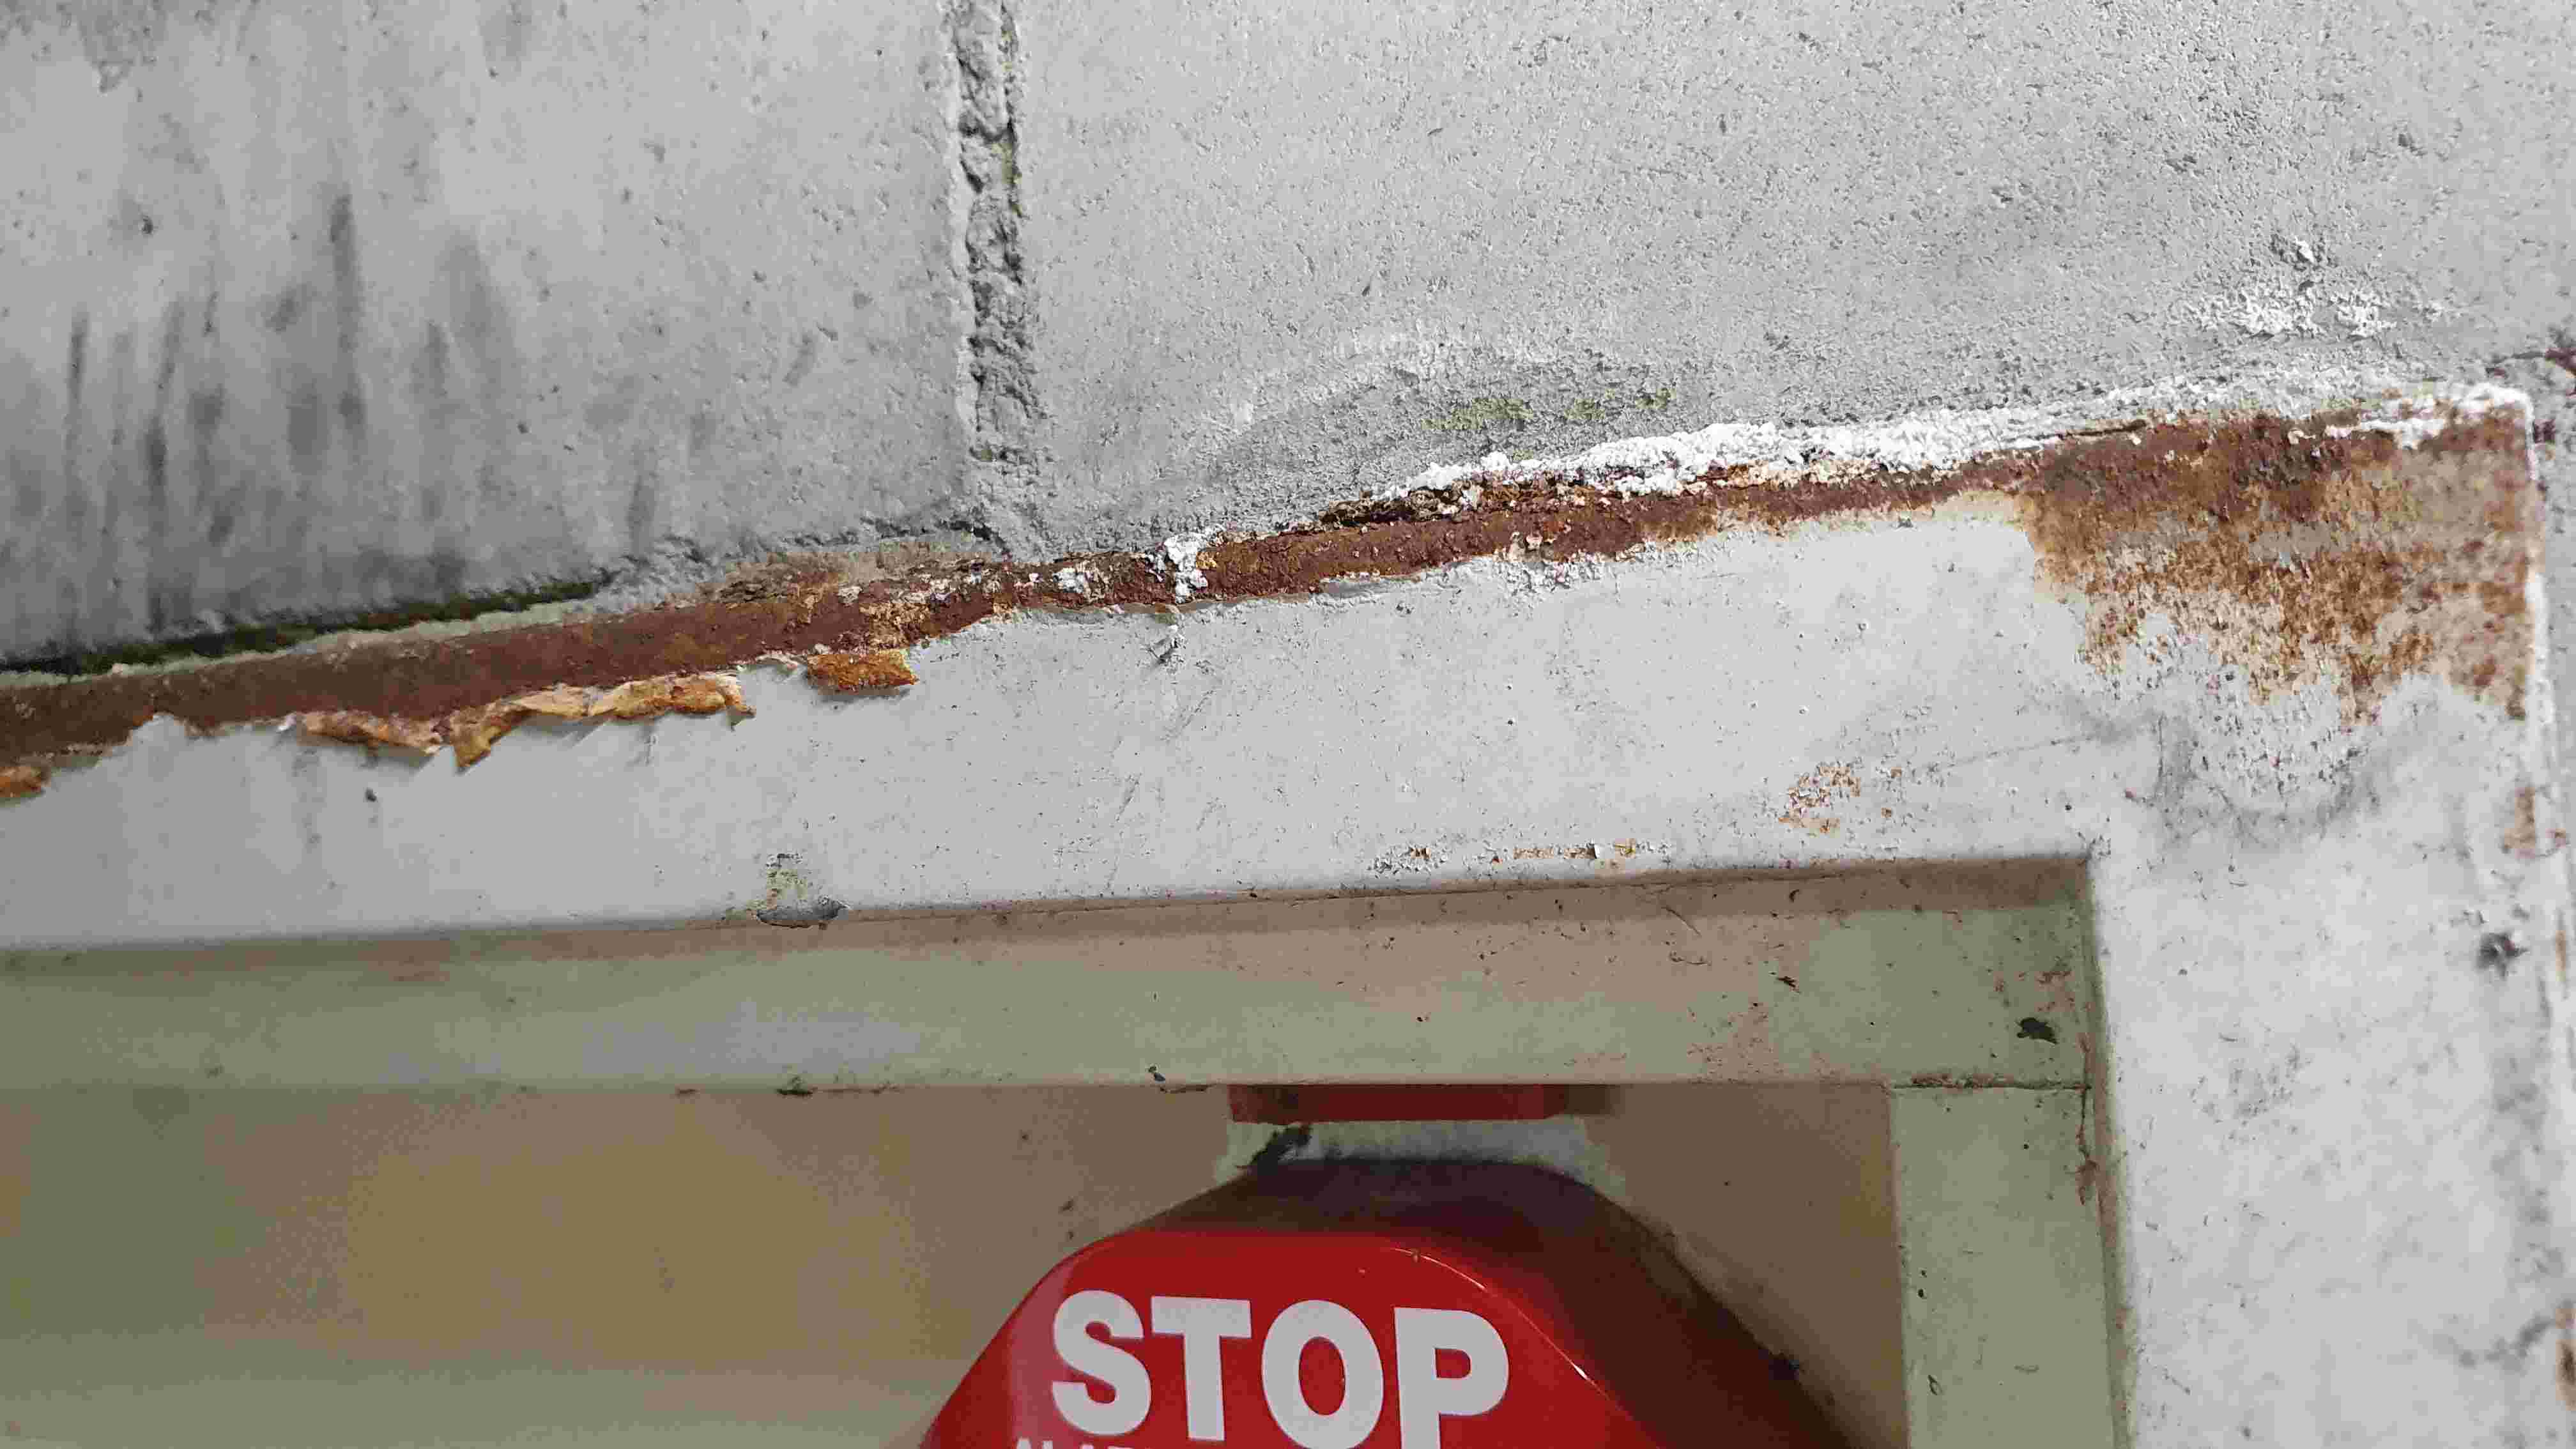 SP52948-Block-A-basement-external-fire-door-rusted-for-six-years-due-to-water-leaks-photo-1-15Feb2022.jpg